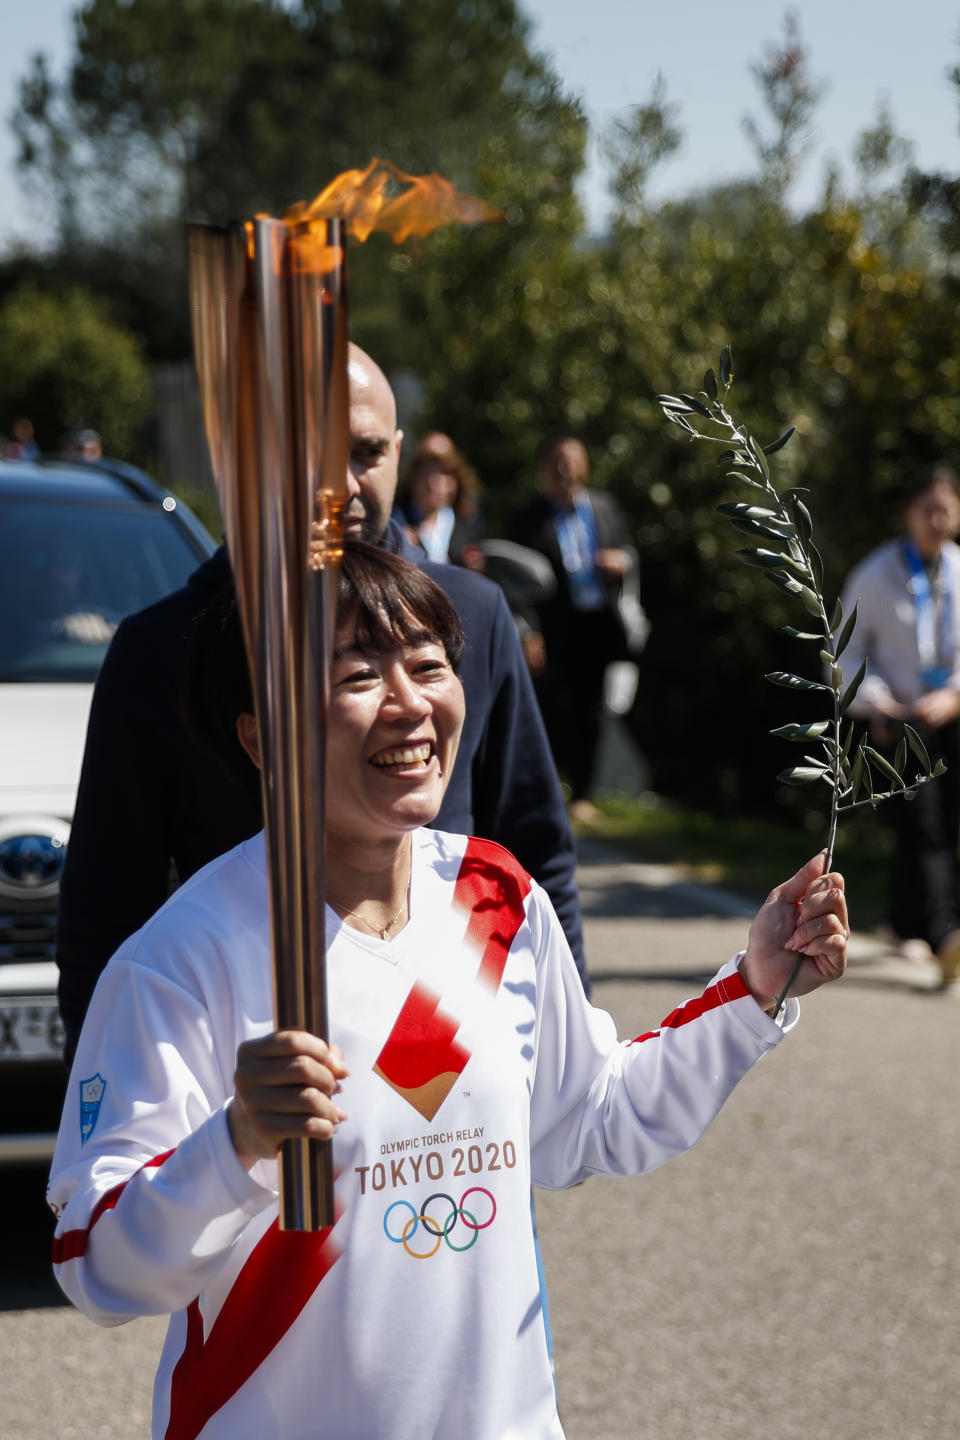 Japanese Olympic marathon champion, Mizuki Noguch, the second torchbearer, holds the torch following the flame lighting ceremony at the closed Ancient Olympia site, birthplace of the ancient Olympics in southern Greece, Thursday, March 12, 2020, 2020. Greek Olympic officials are holding a pared-down flame-lighting ceremony for the Tokyo Games due to concerns over the spread of the coronavirus. Both Wednesday's dress rehearsal and Thursday's lighting ceremony are closed to the public, while organizers have slashed the number of officials from the International Olympic Committee and the Tokyo Organizing Committee, as well as journalists at the flame-lighting. (AP Photo/Thanassis Stavrakis)